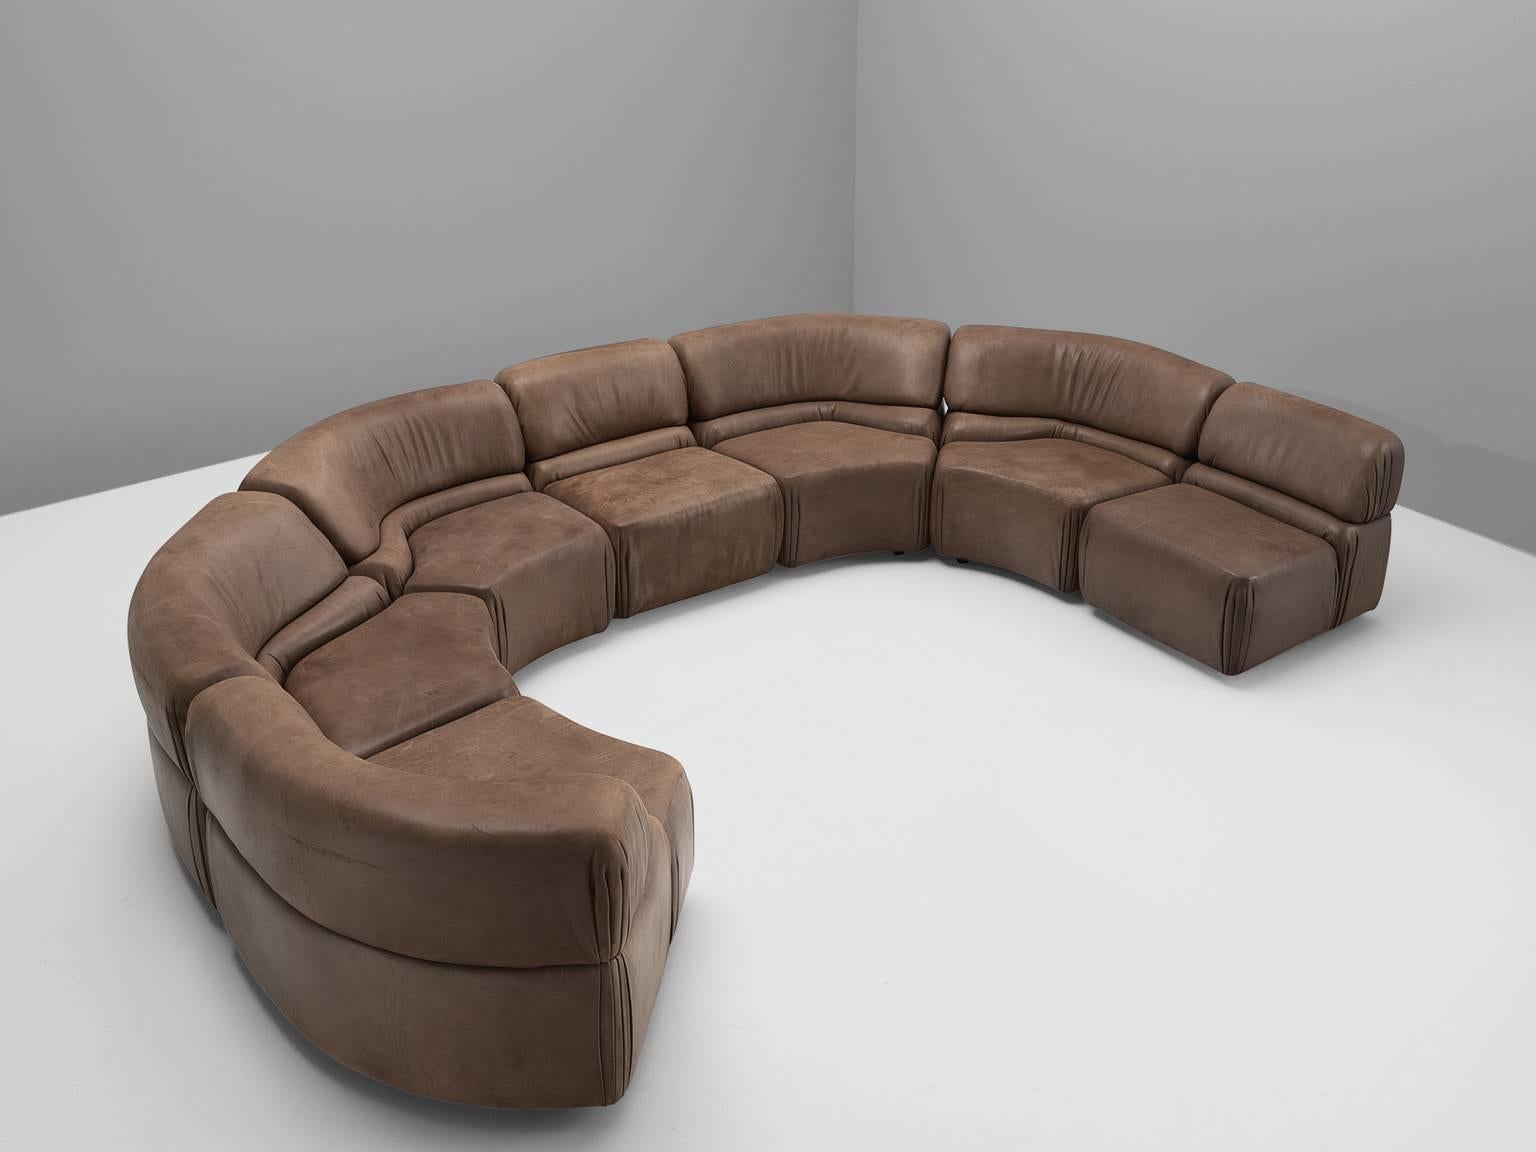 De Sede 'Cosmos', patinated brown leather, seven elements, Switzerland, 1970s.

Thick, high-quality modular sofa made by De Sede in Switzerland in the 1970s. Due to the separate elements, the couch can be used in a variety of different positions.